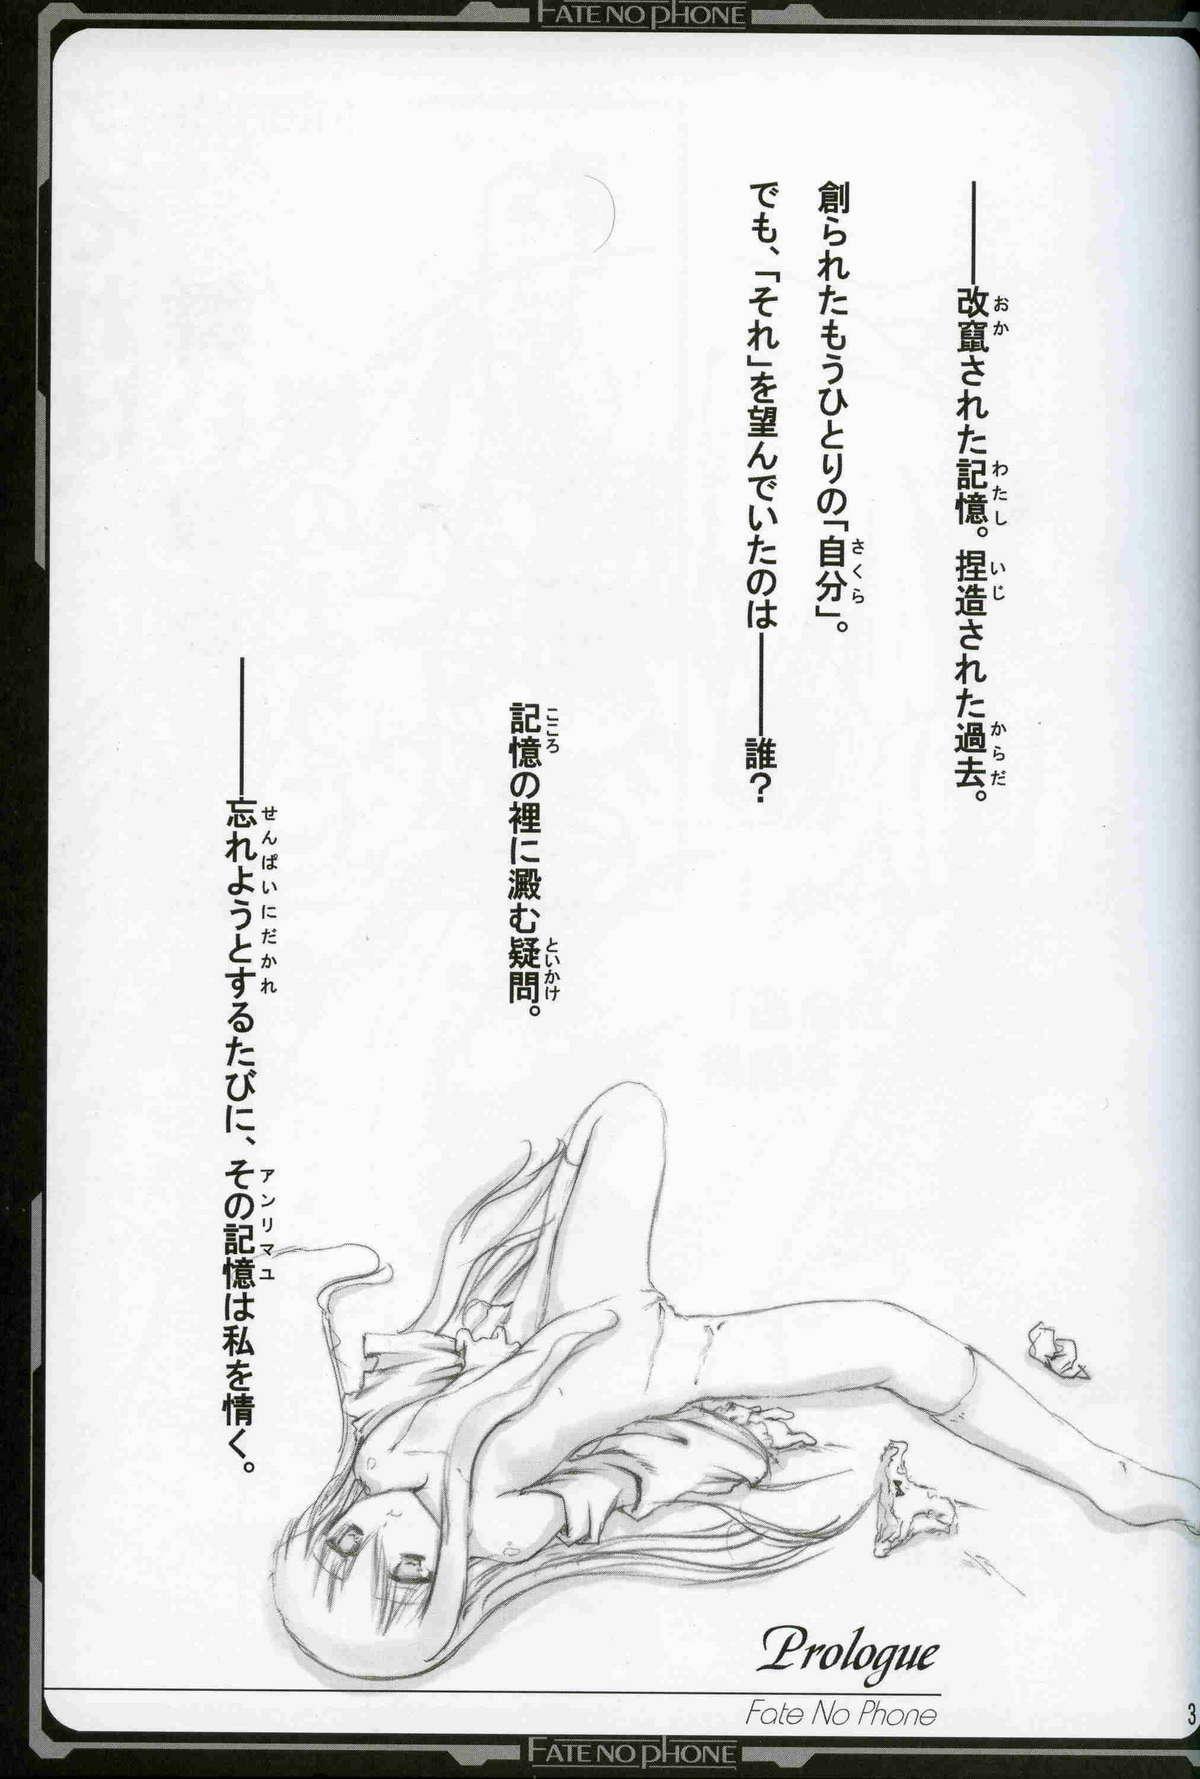 Best Blowjob Fate/no phone - Fate stay night Sex Toys - Page 2